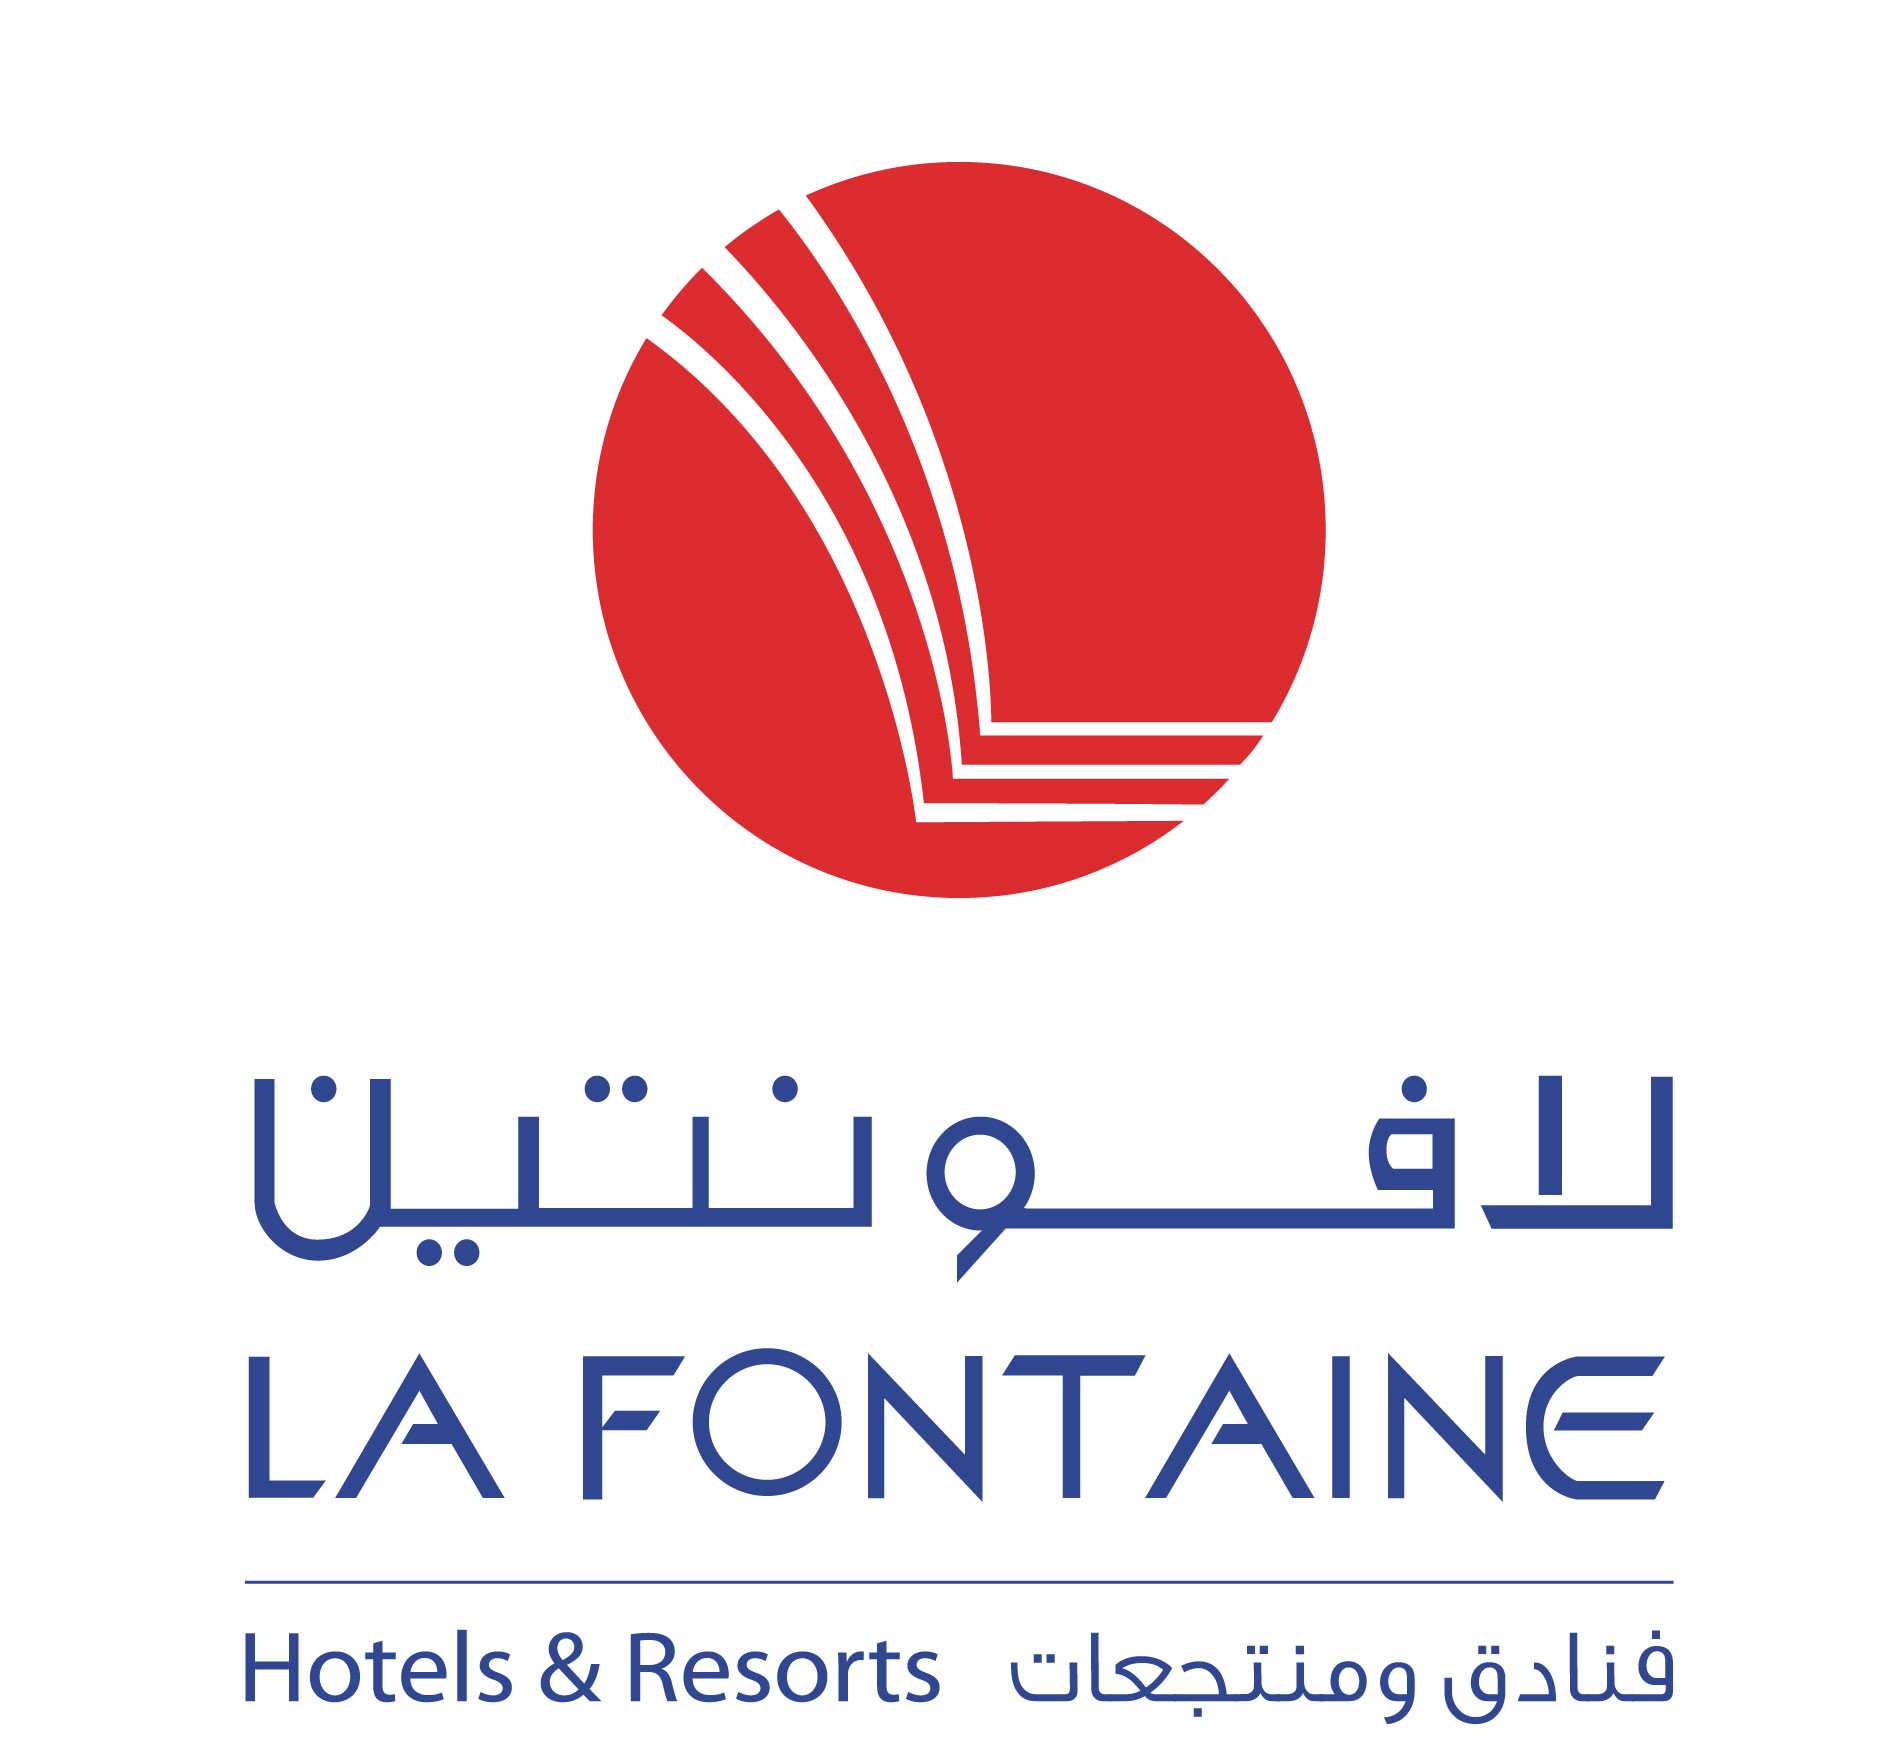 Lafontaine Hotels & Resorts